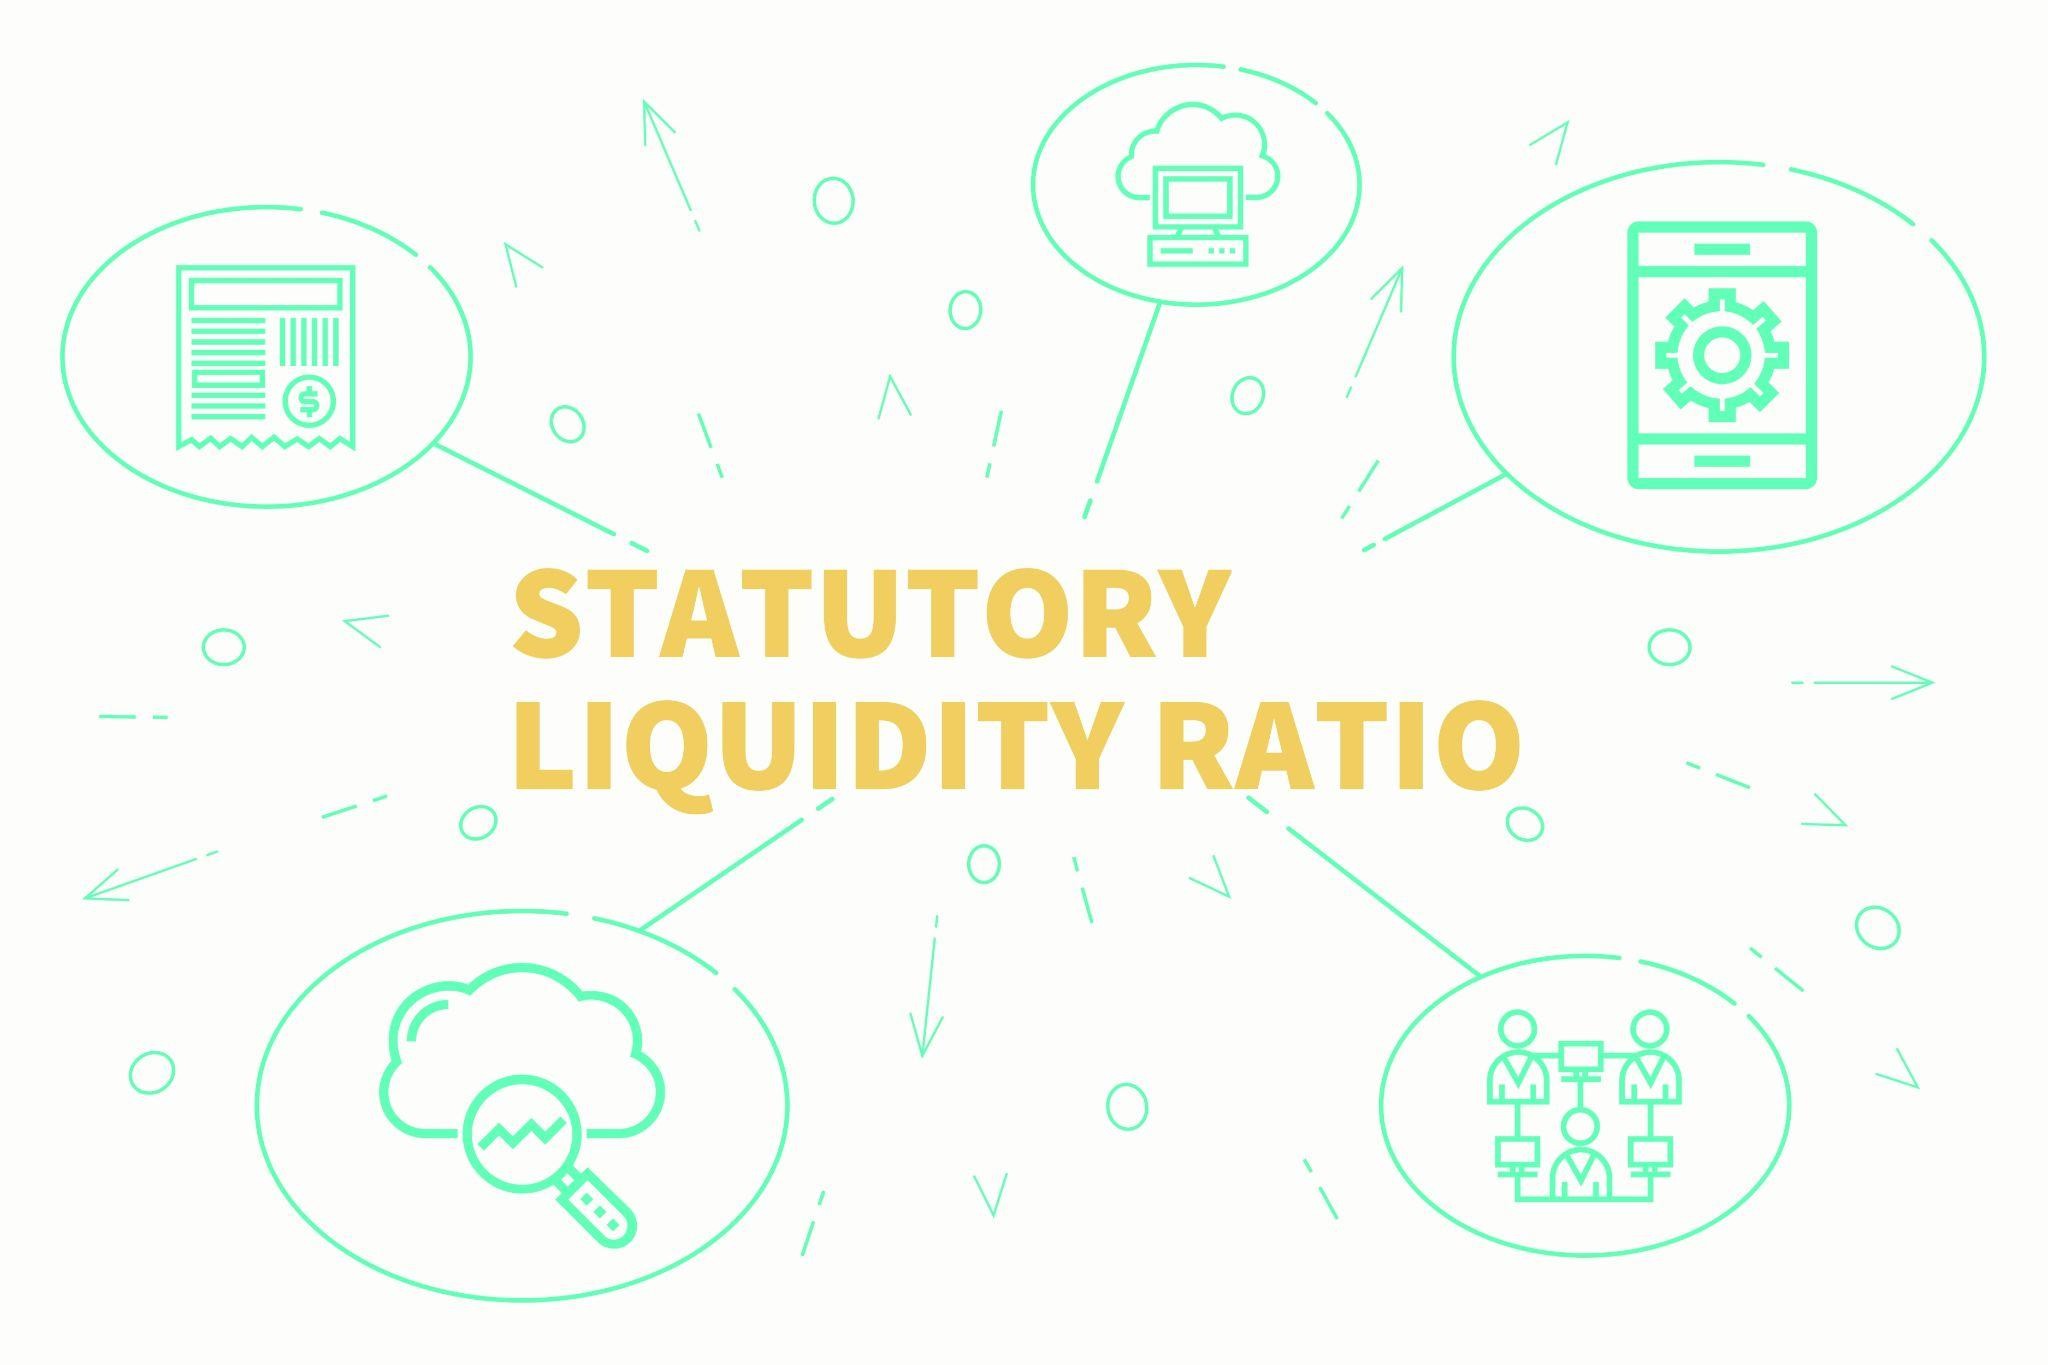 What Is Statutory Liquidity Ratio And Why Is It Important?